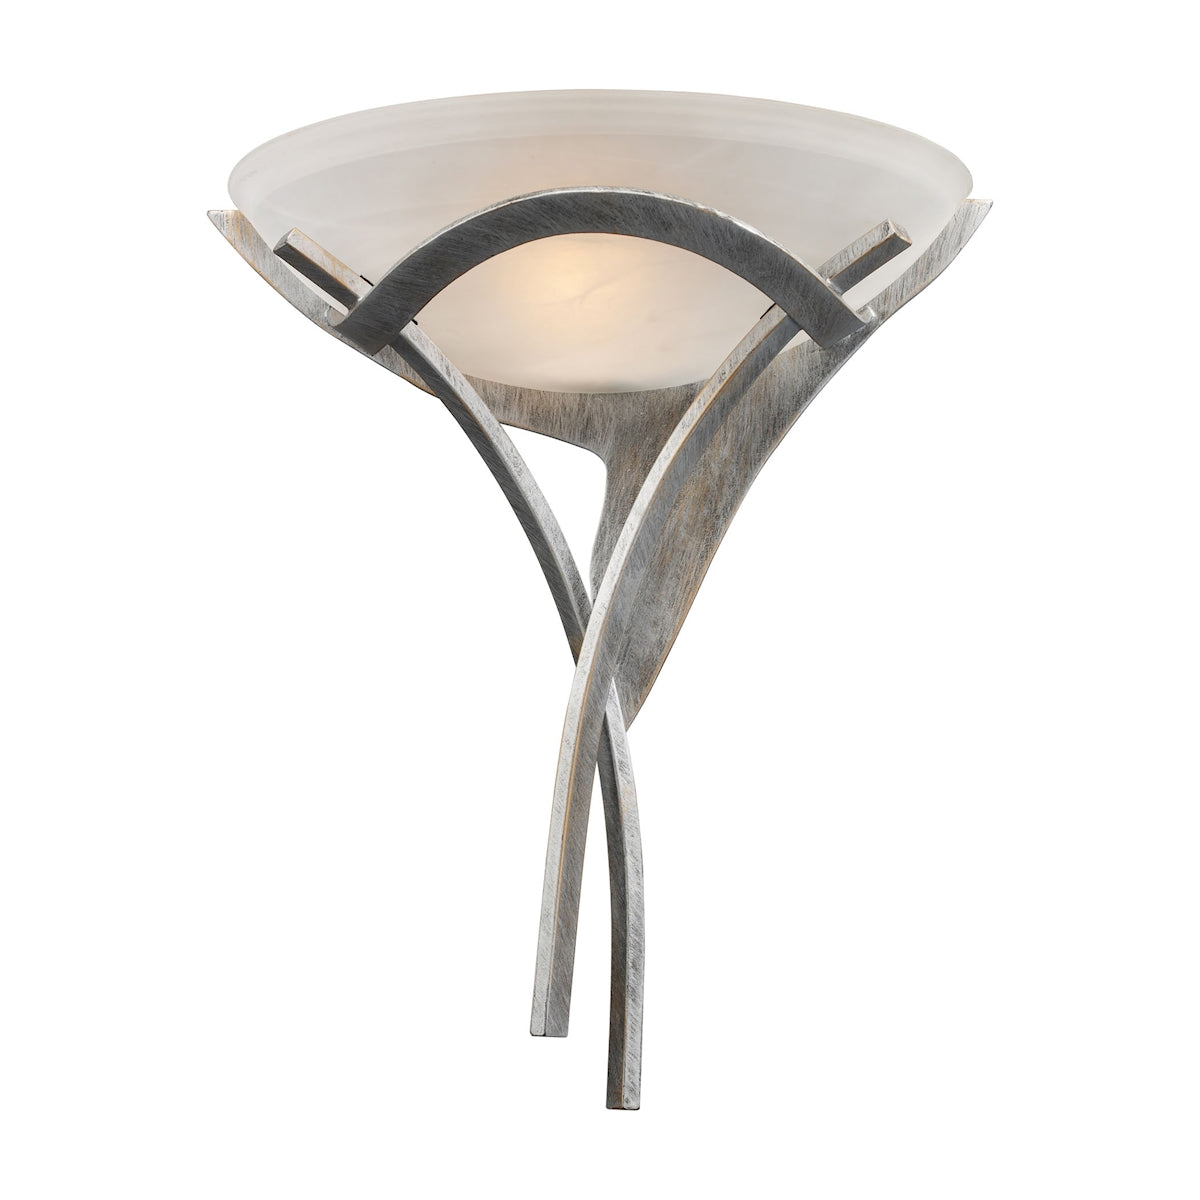 ELK Lighting 001-TS - Aurora 16" Wide 1-Light Sconce in Tarnished Silver with White Faux-Alabaster G